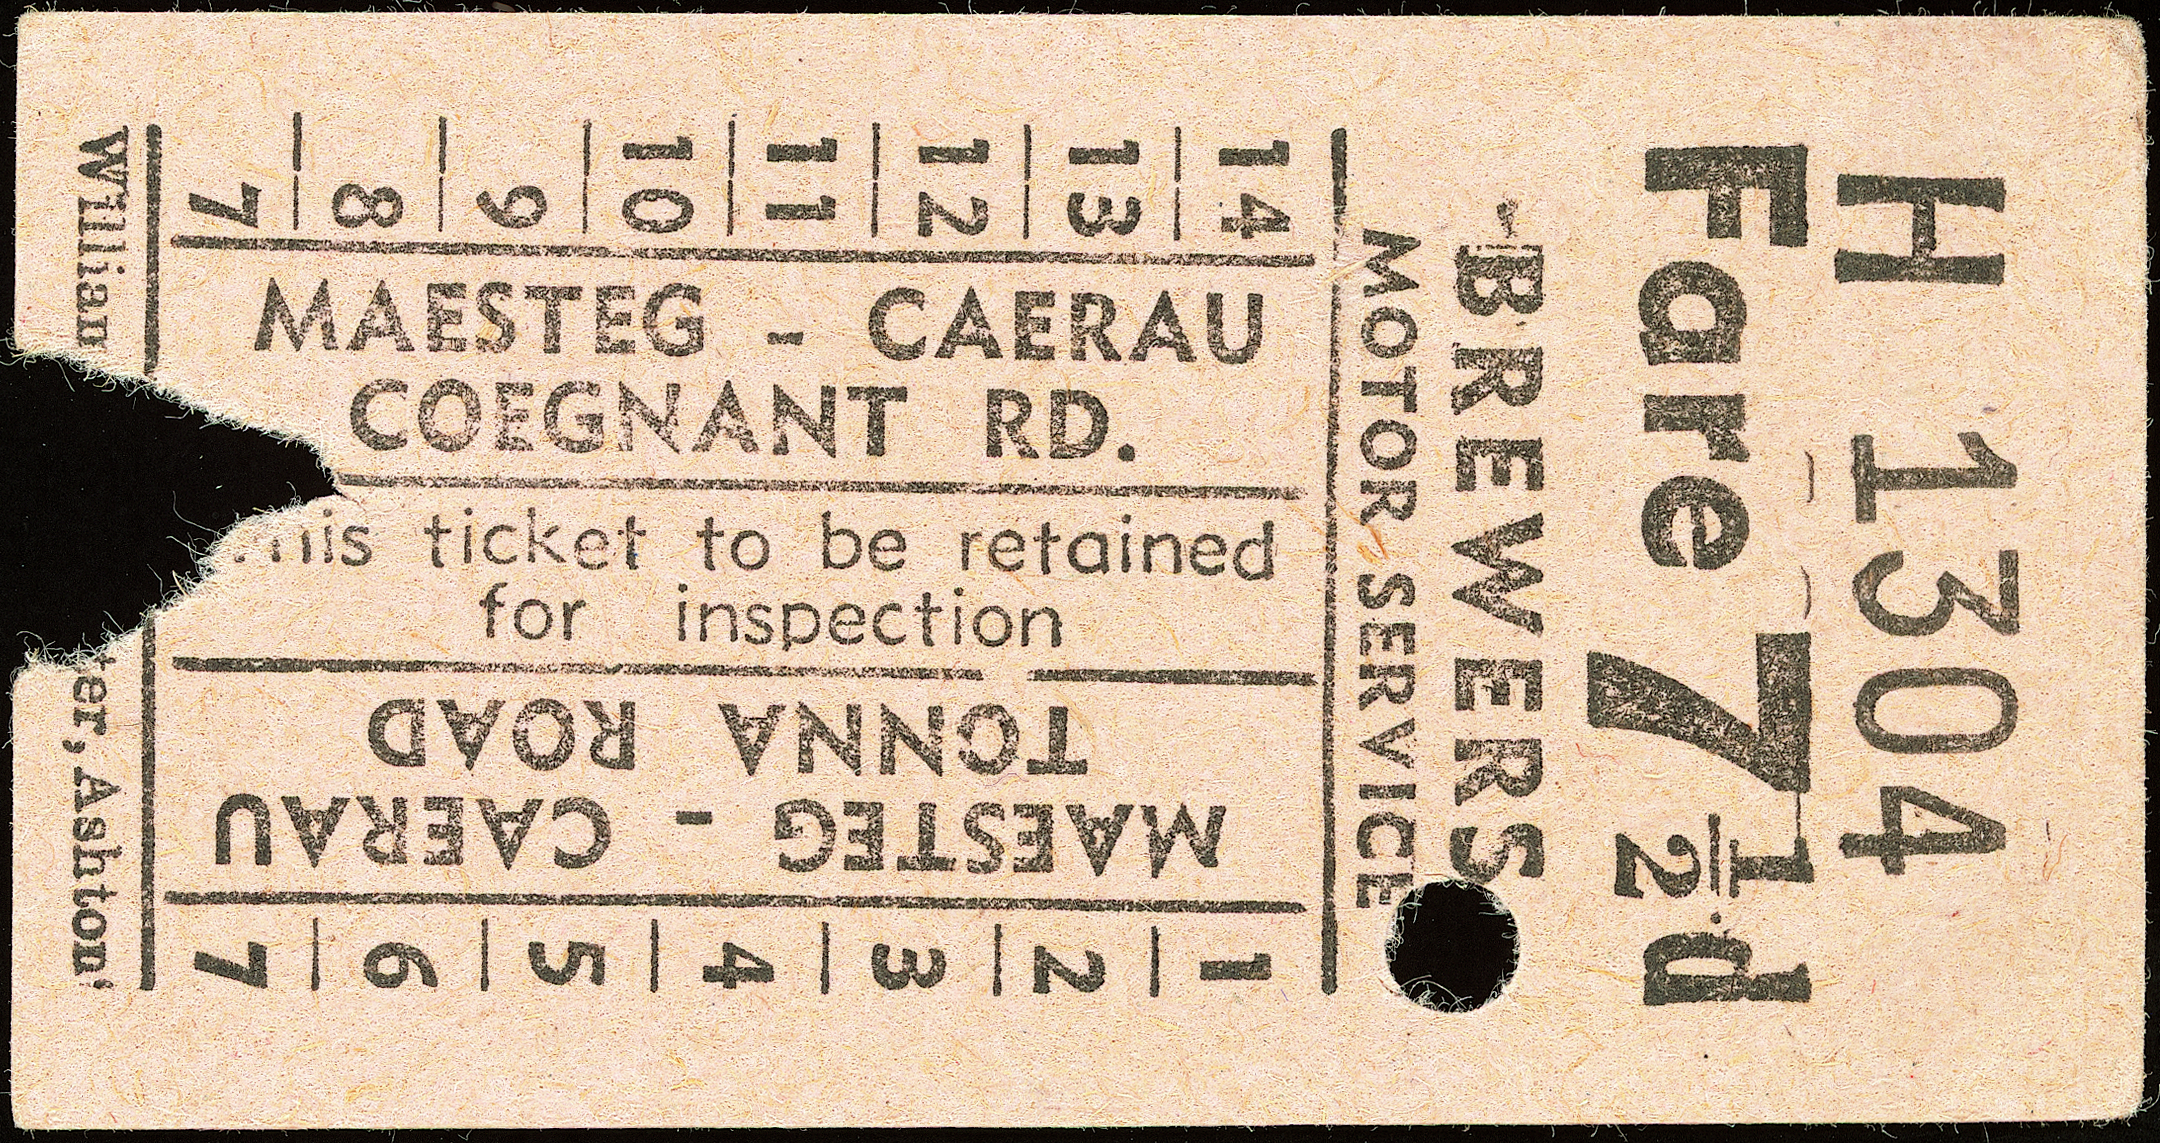 Brewers Motor Service, bus ticket